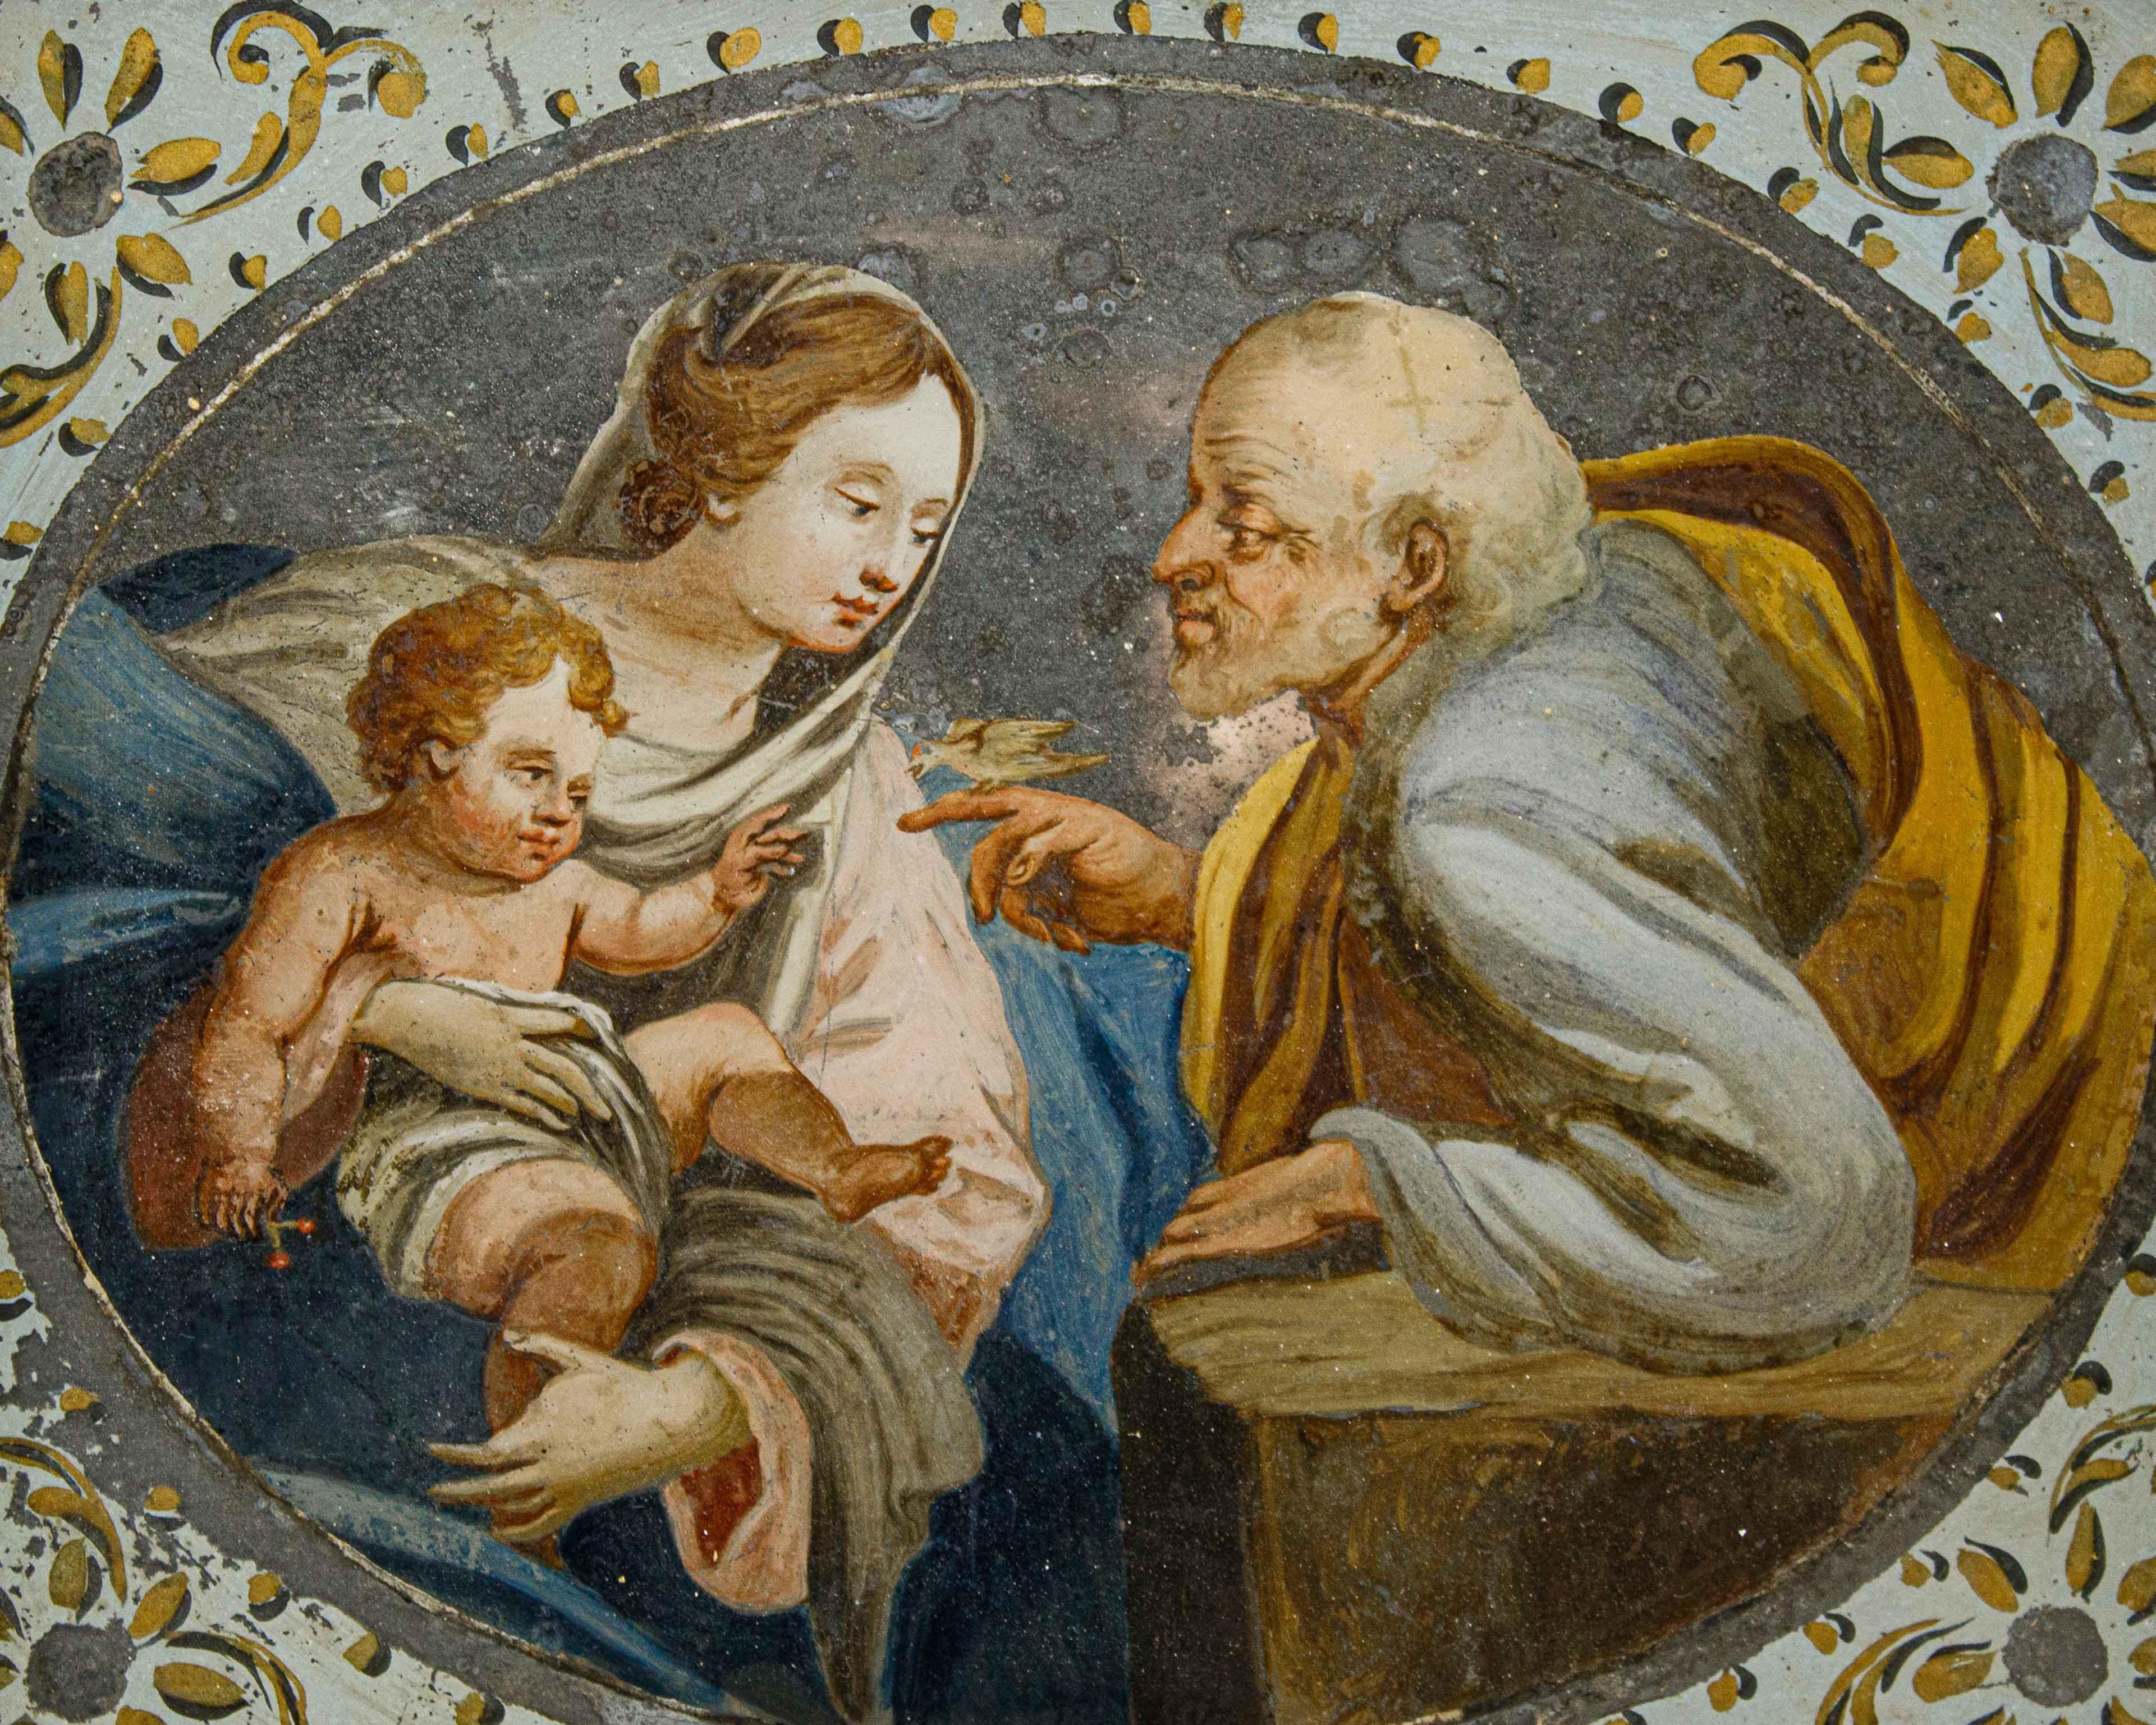 Follower of Simon Vouet (Paris, 1590 - 1649)

The Holy Family with bird

Oil on glass, cm 20.5 x 23.5; with frame cm 27.5 x 29.5

The small painting examined, made on glass and typical of private devotion in its dimensions, is distinguished by